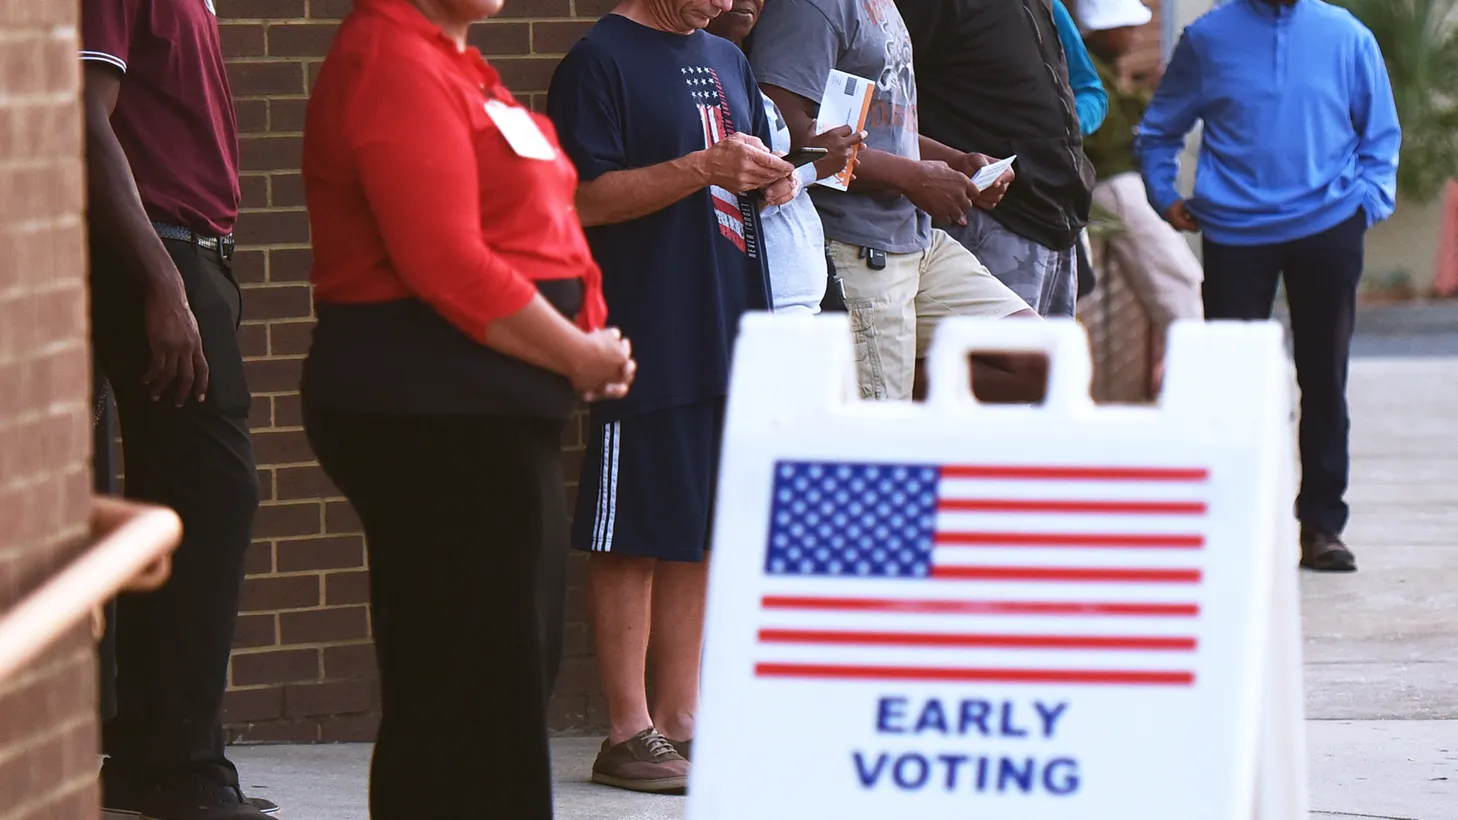 People wait in line to cast their ballots at the Orange County Supervisor of Elections Office on the first day of early voting for the 2022 midterm general election in Orlando, October 24, 2022.